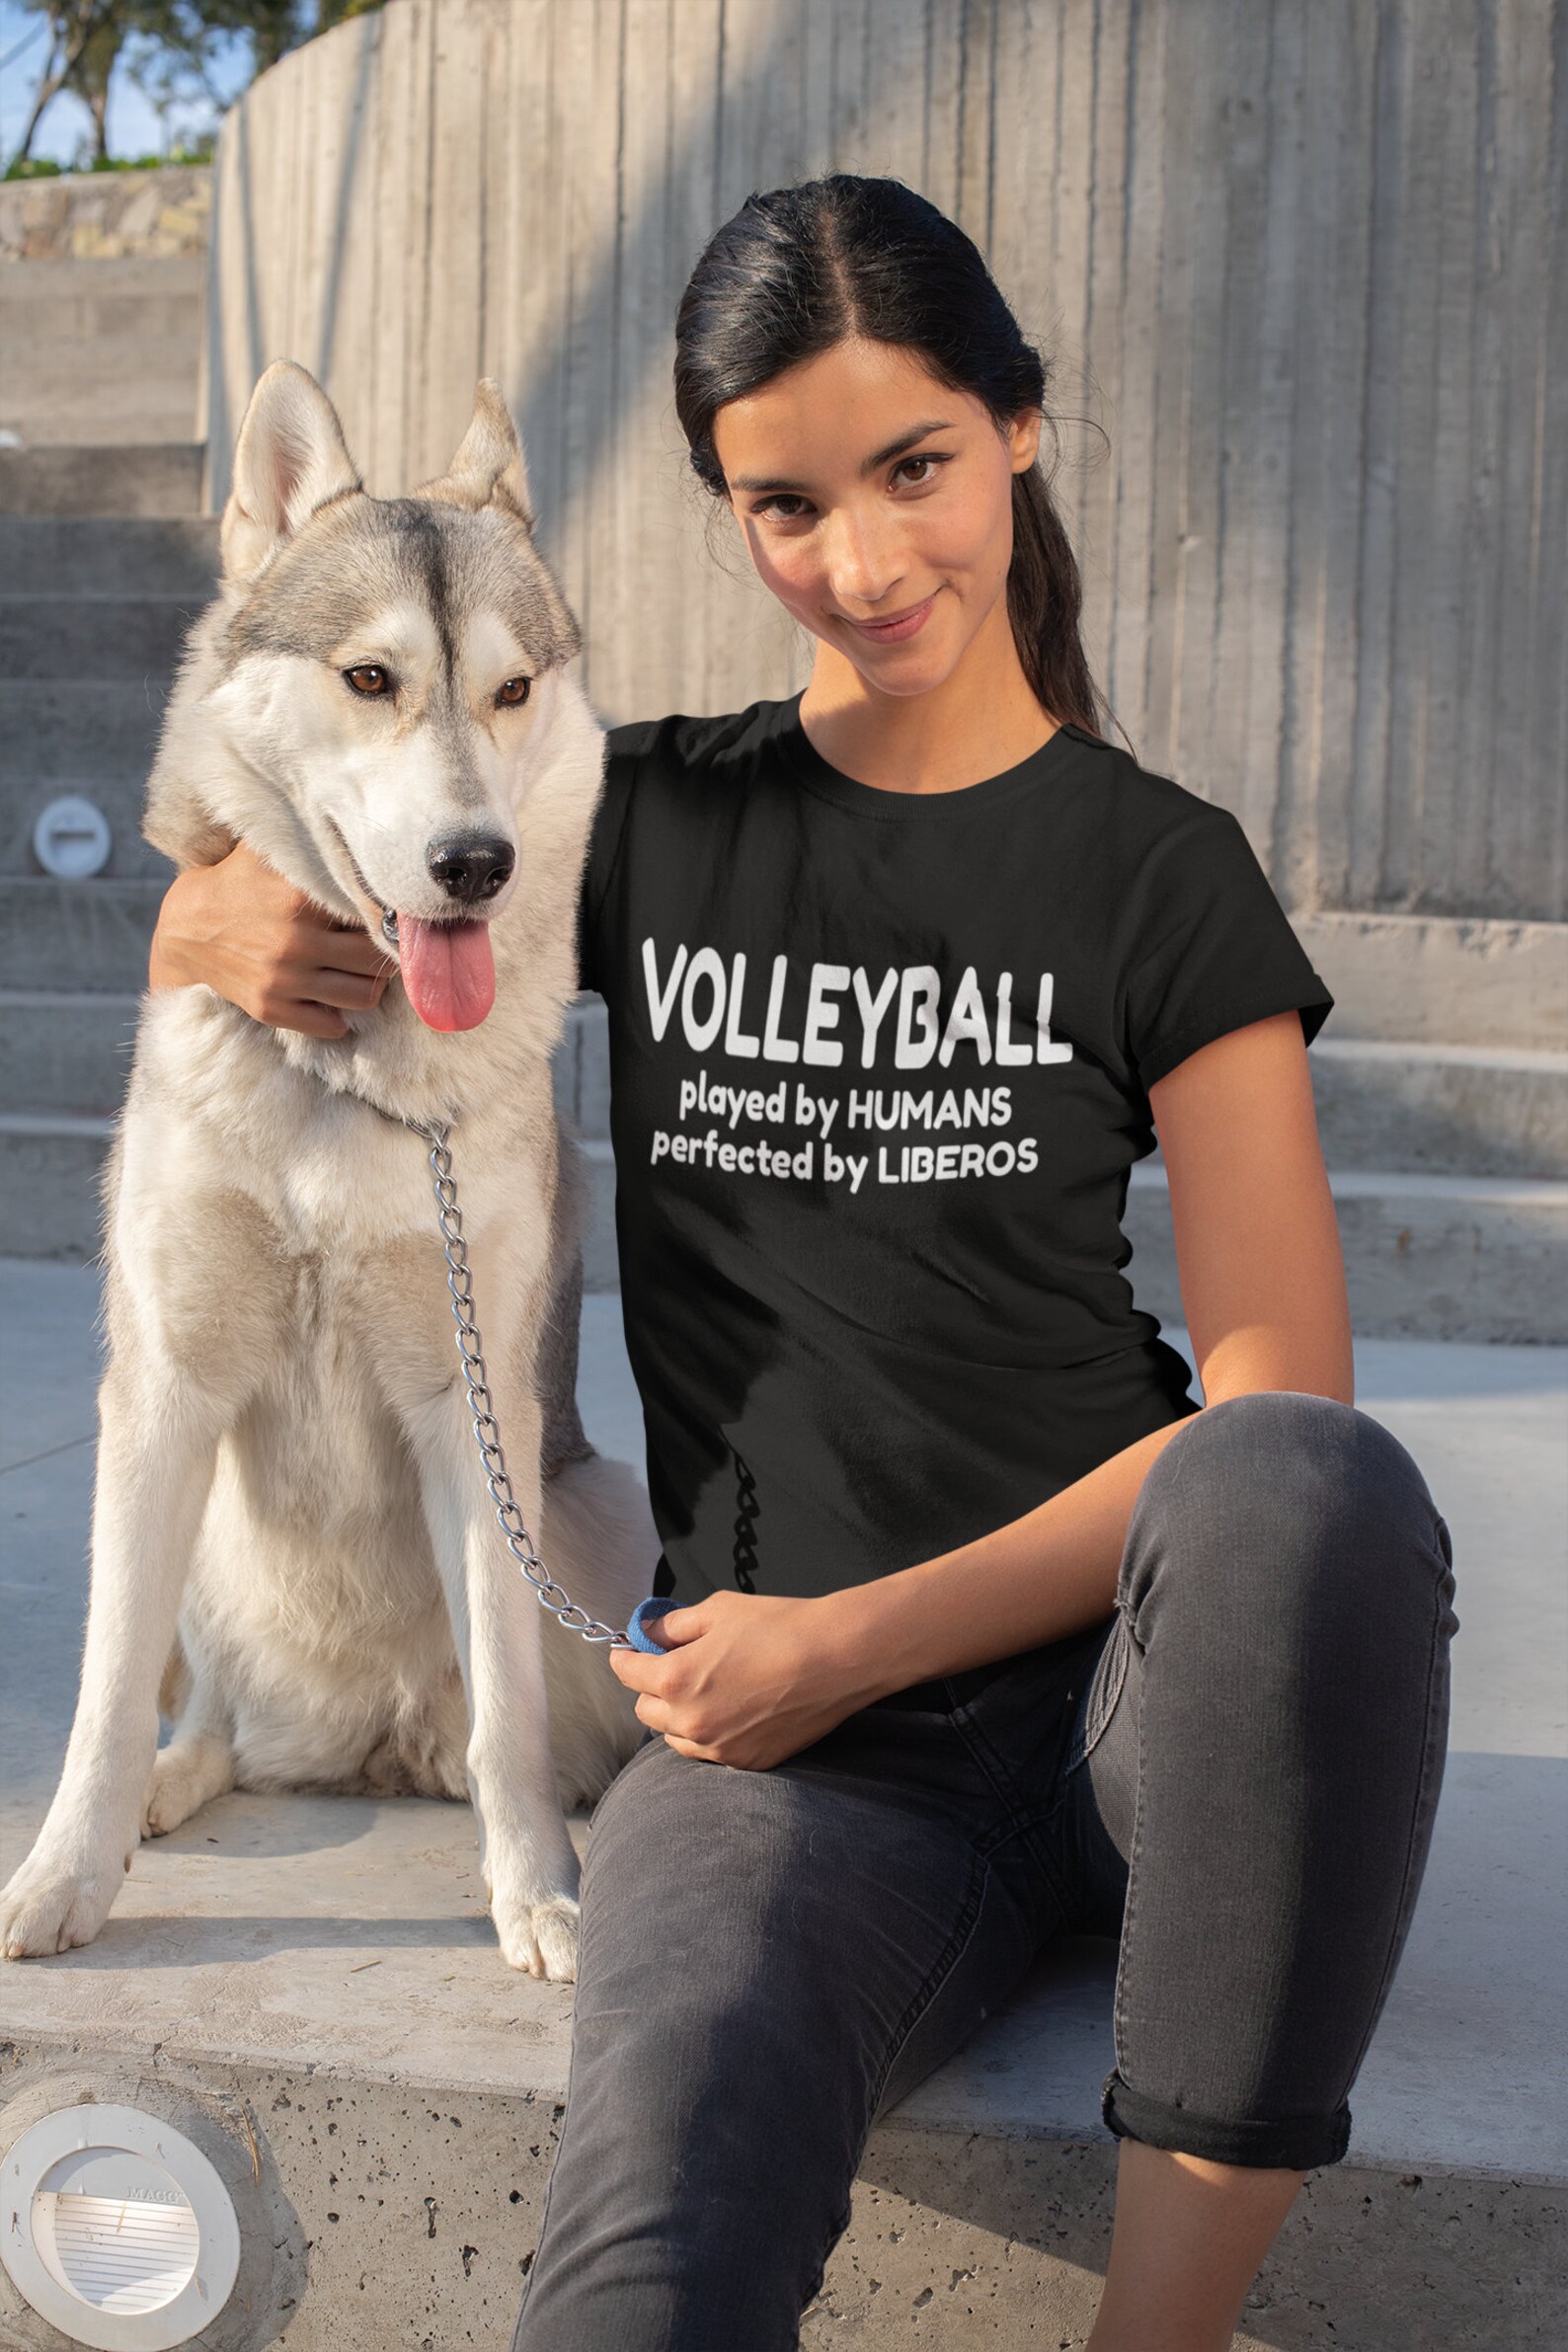 Volleyball quotes like "VOLLEYBALL Played by Humans Perfected by Liberos" are some of the motivational volleyball sayings on short and long sleeve shirts, matching oversized hoodies and wide leg volleyball pajama pj pants.